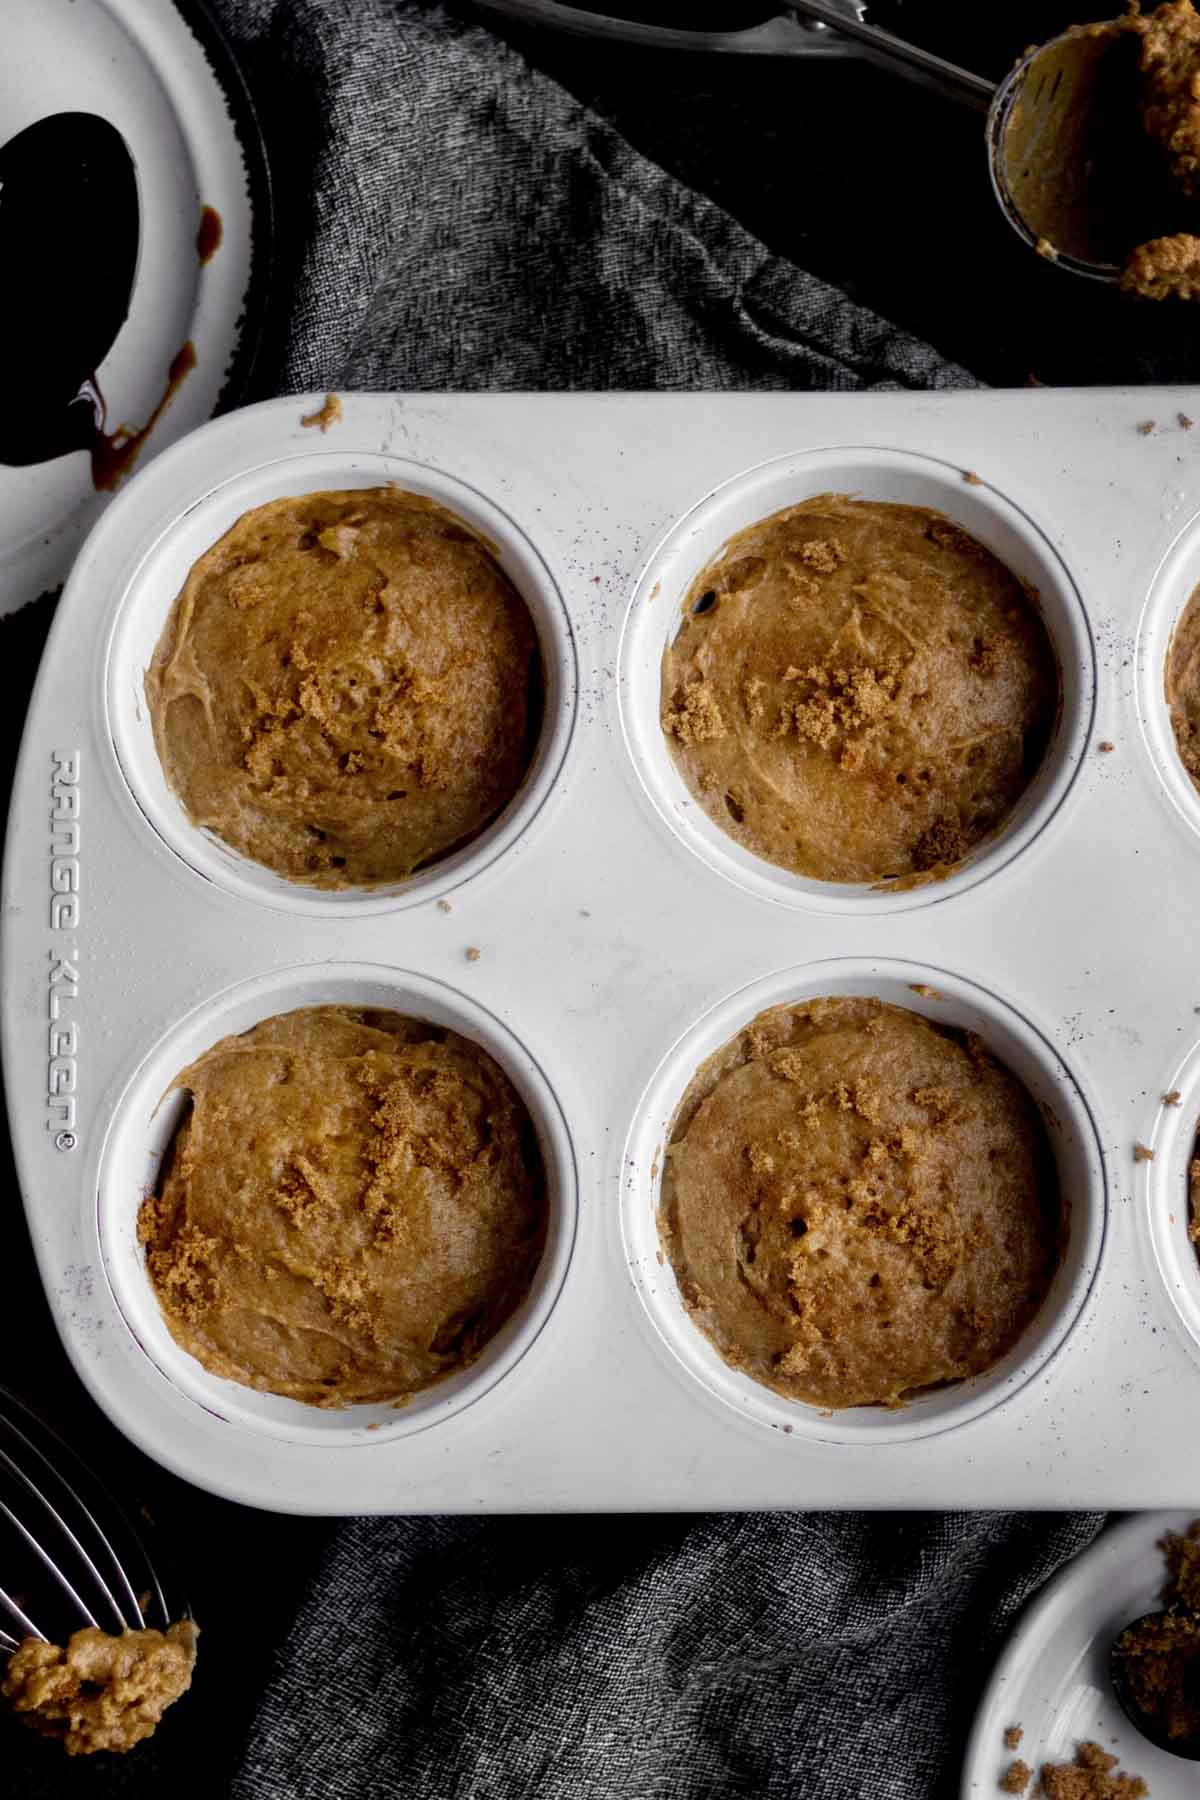 Filling the muffin tins to the very top with sprinkled brown sugar.